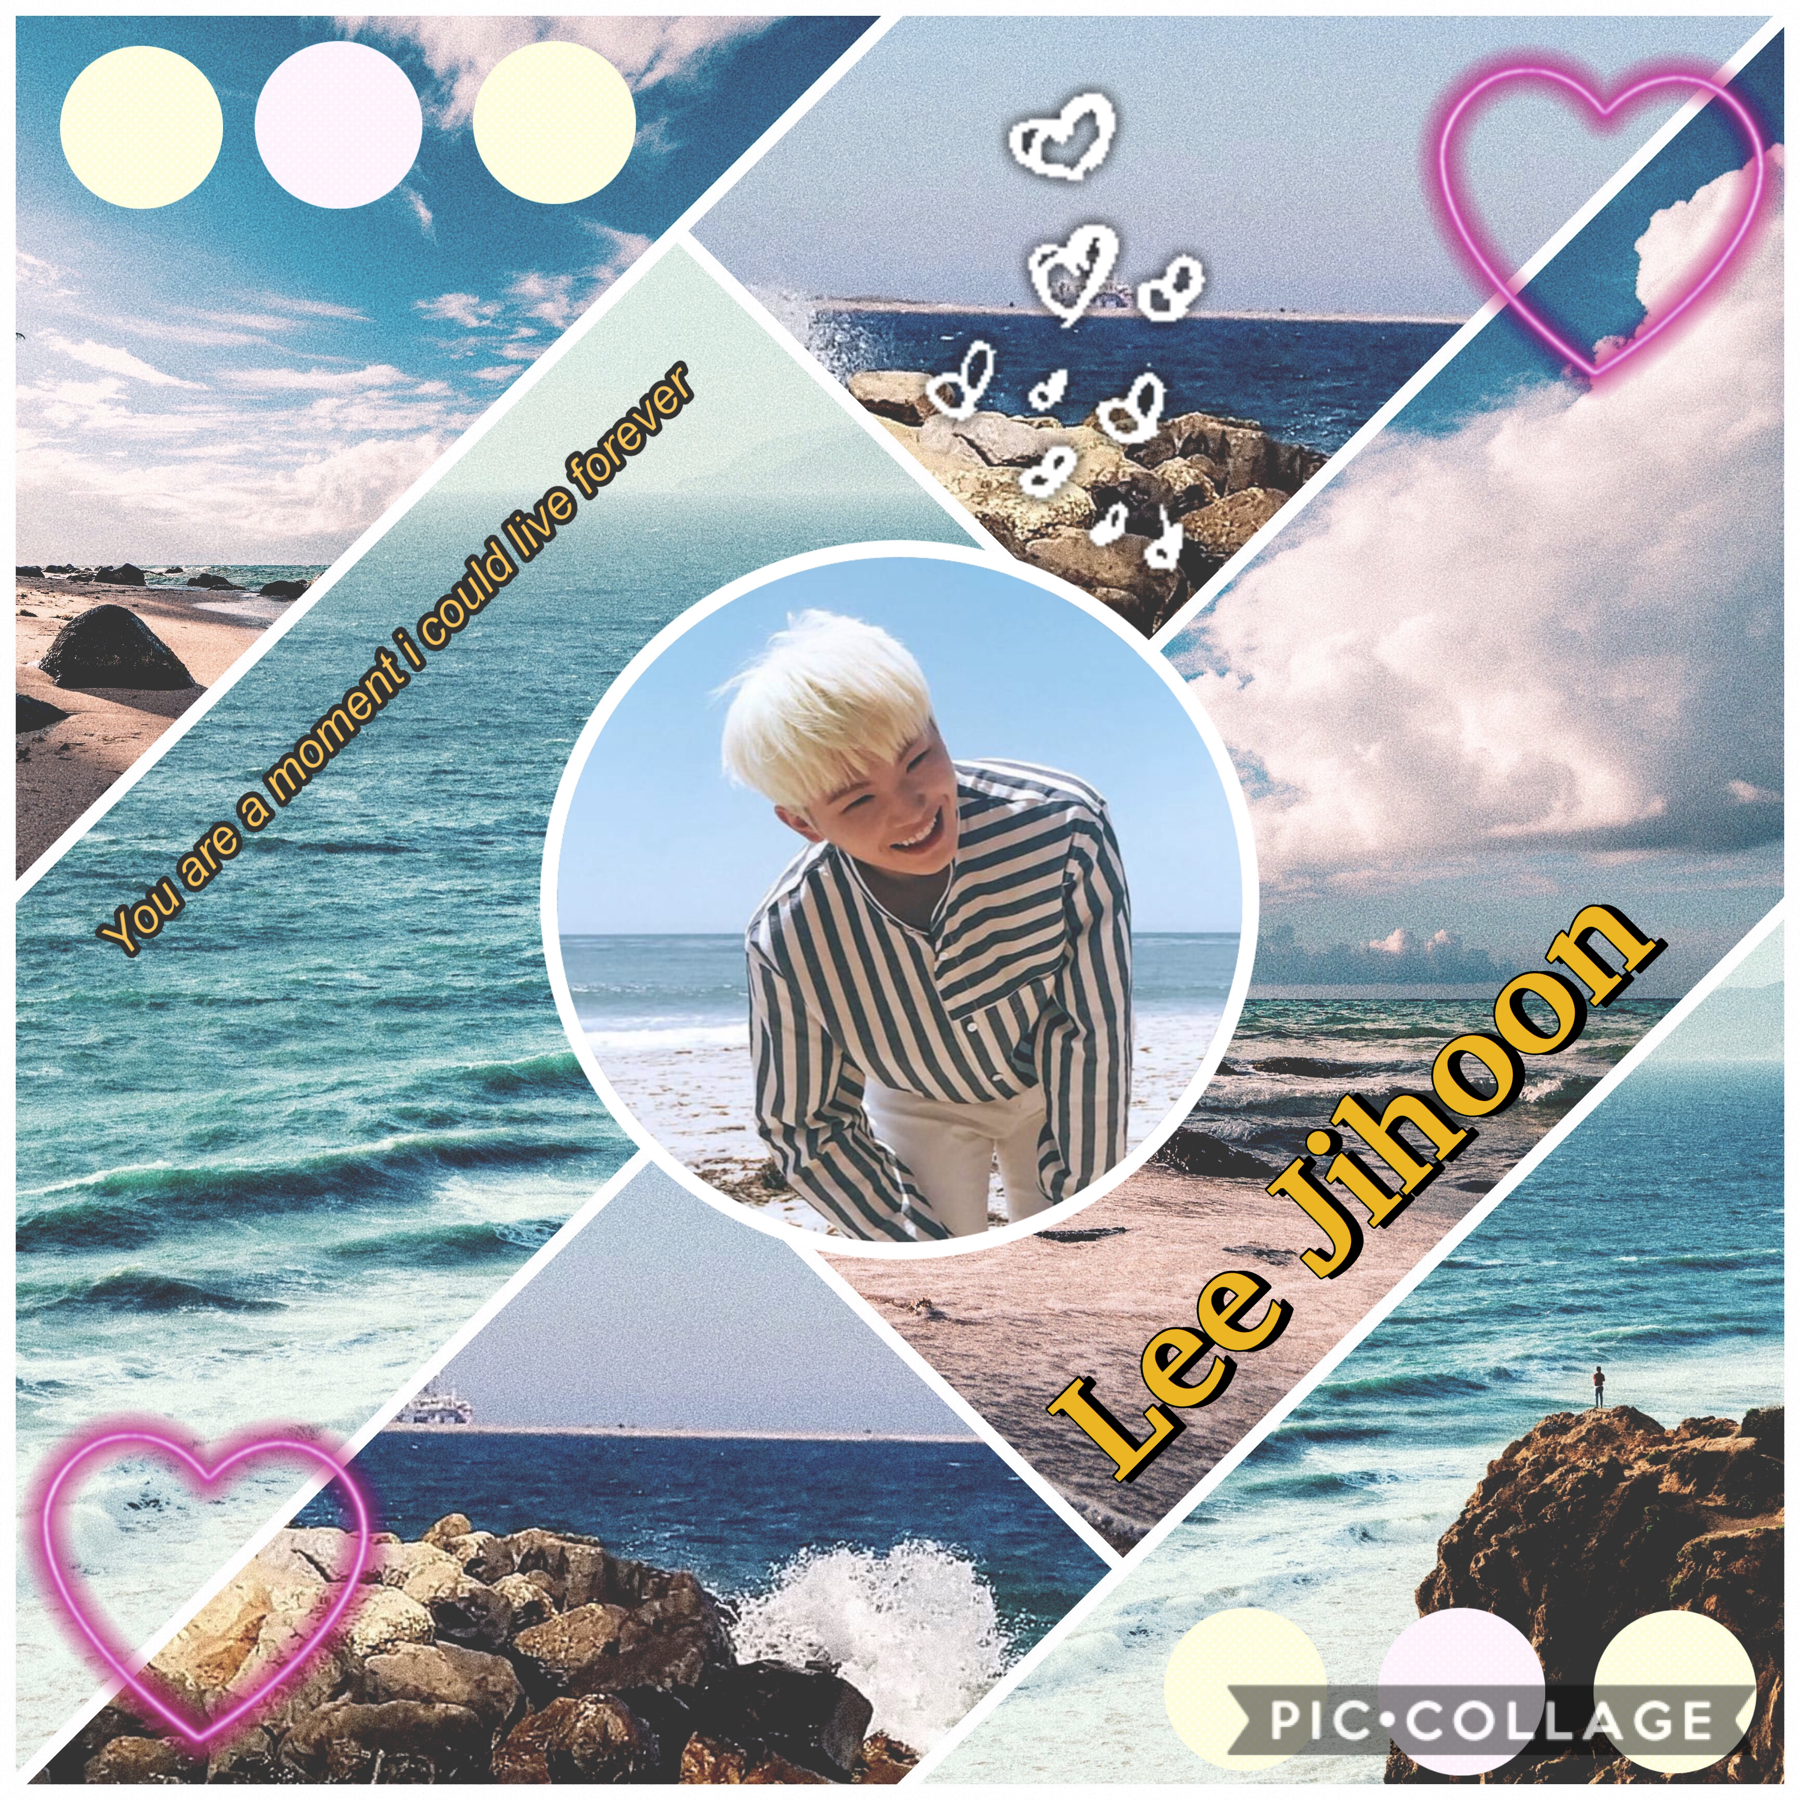 •🚒•
❄️Woozi~Seventeen❄️
Hey~ I’m really trying to edit more often! Here’s another beach themed edit bc I miss warm weather haha🥺😂 Expect more Haikyuu edits:)